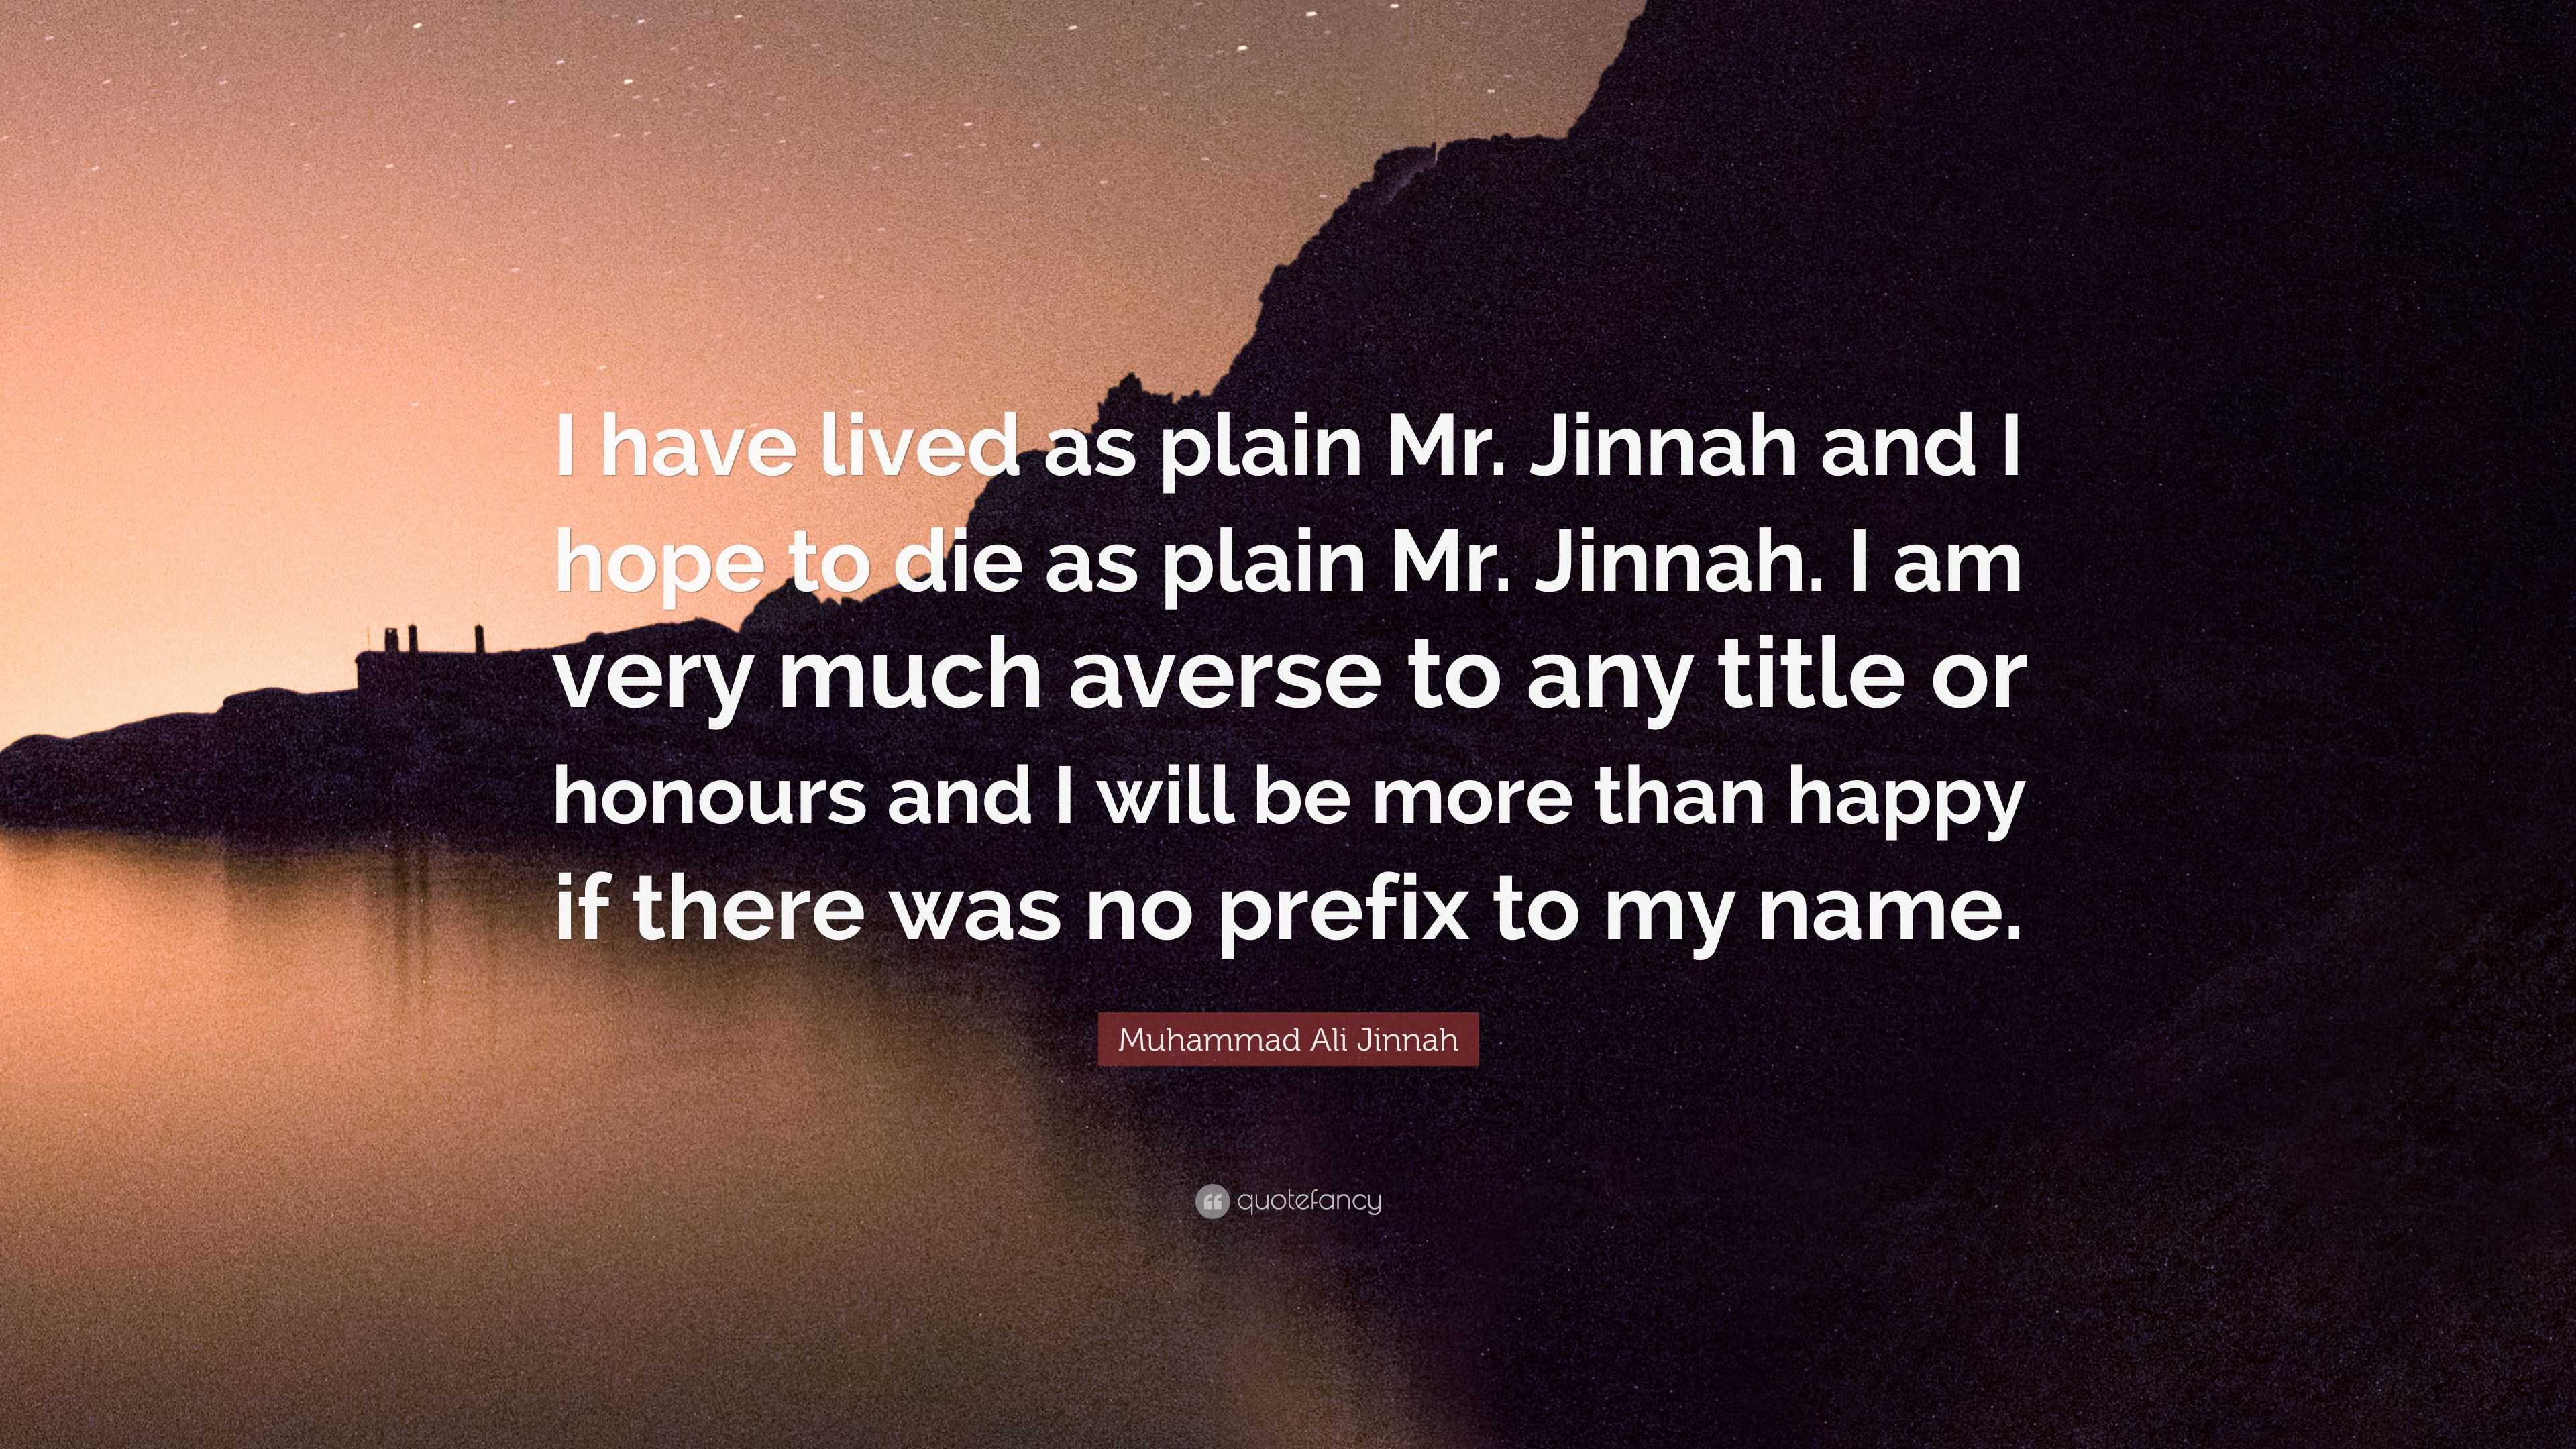 Muhammad Ali Jinnah Quote: "I have lived as plain Mr ...